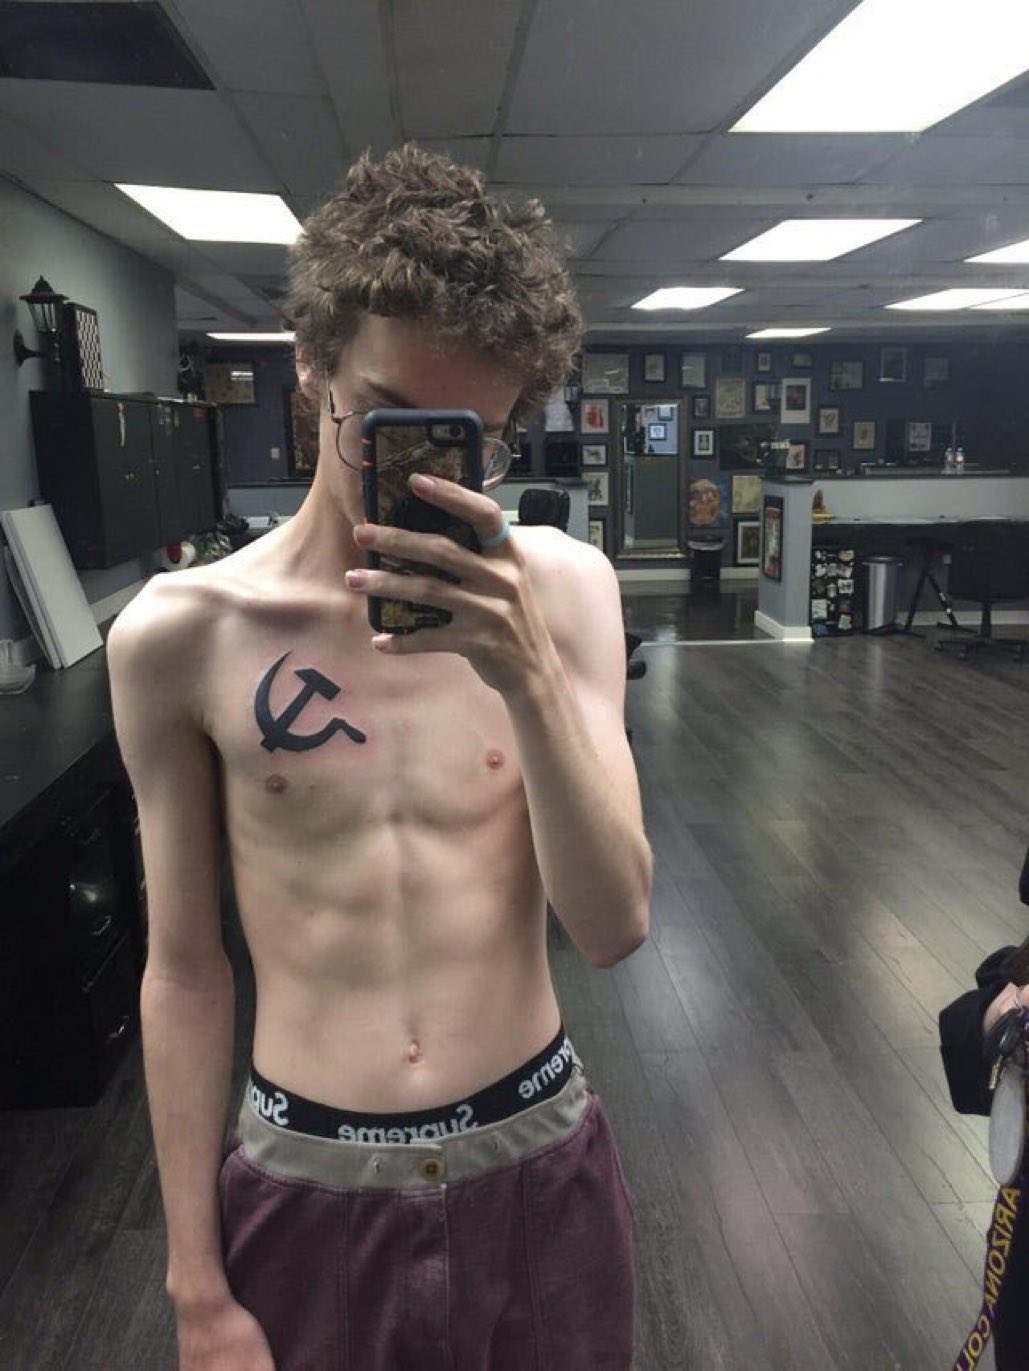 Visegrád 24 on X: Reminder that tattooing a totalitarian symbol on your  chest, under which some 100 million people were murdered, killed or starved  is not edgy or cool. Also, the added